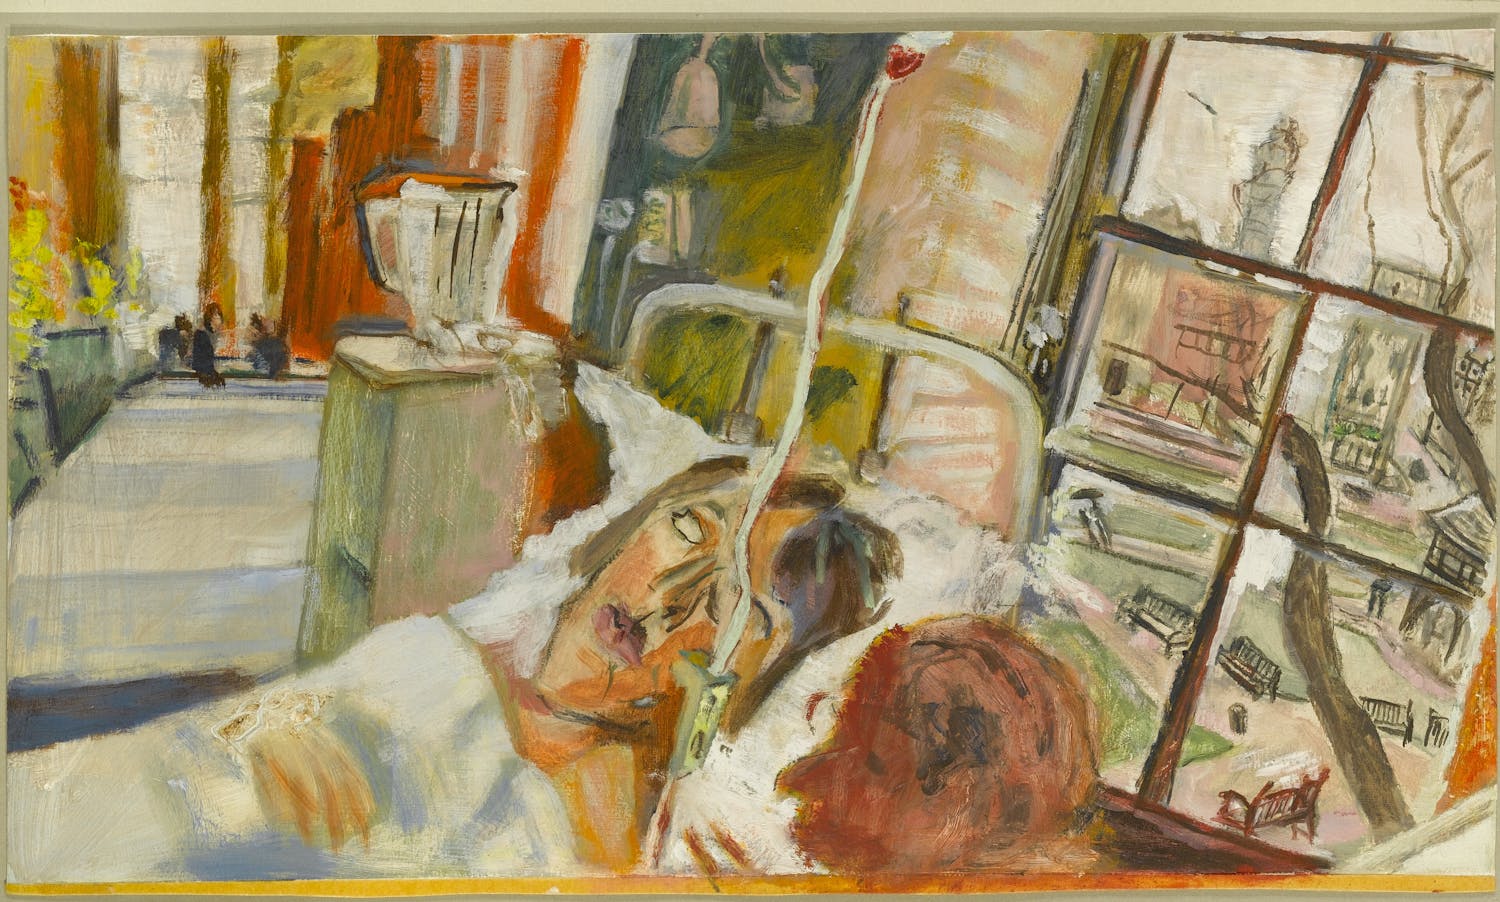 [ID: This image shows a painting of a woman lying in a hospital bed. On the right of the image is a window, which reveals a view of an empty park and buildings in the background. End of ID]